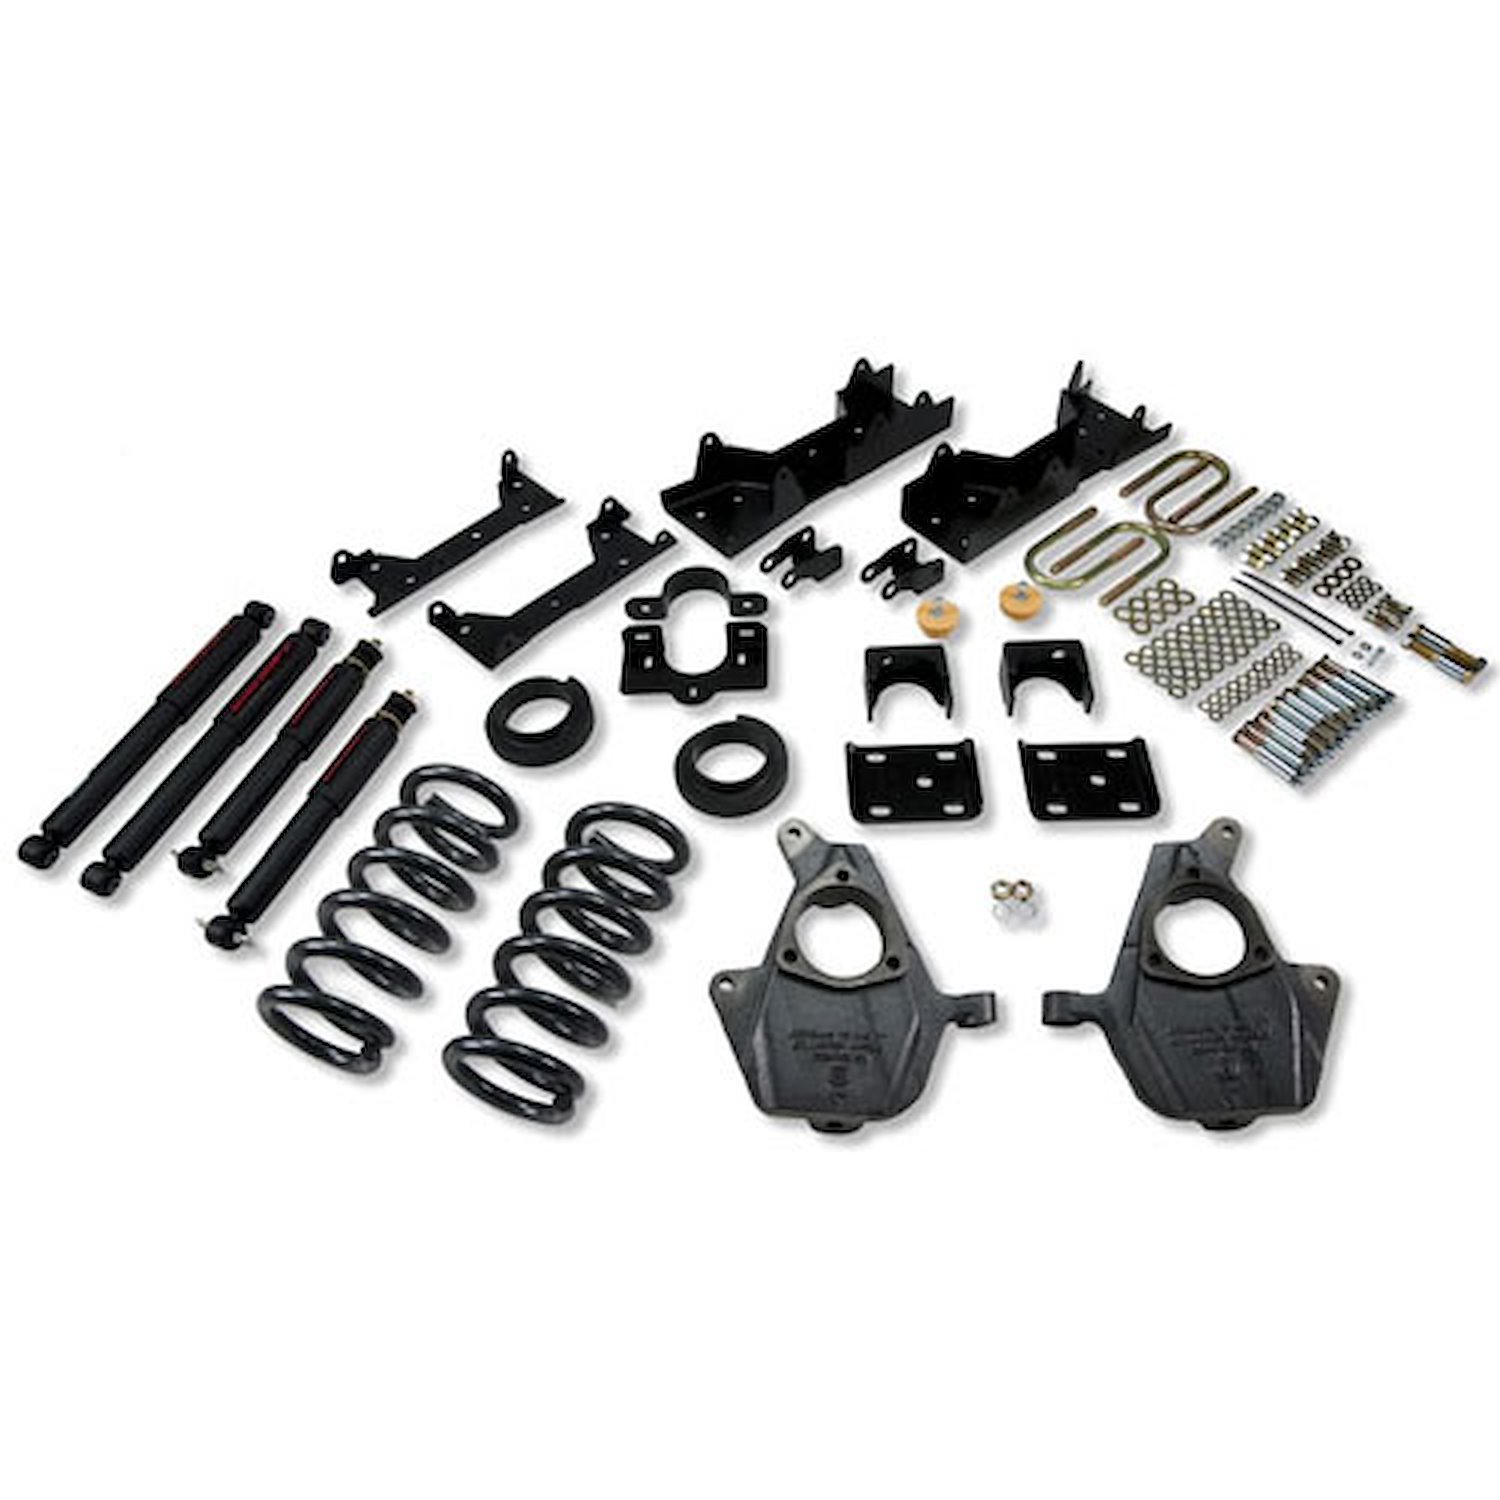 Complete Lowering Kit for 2001-2006 Chevy Silverado/GMC Sierra 1500 Extended Cab